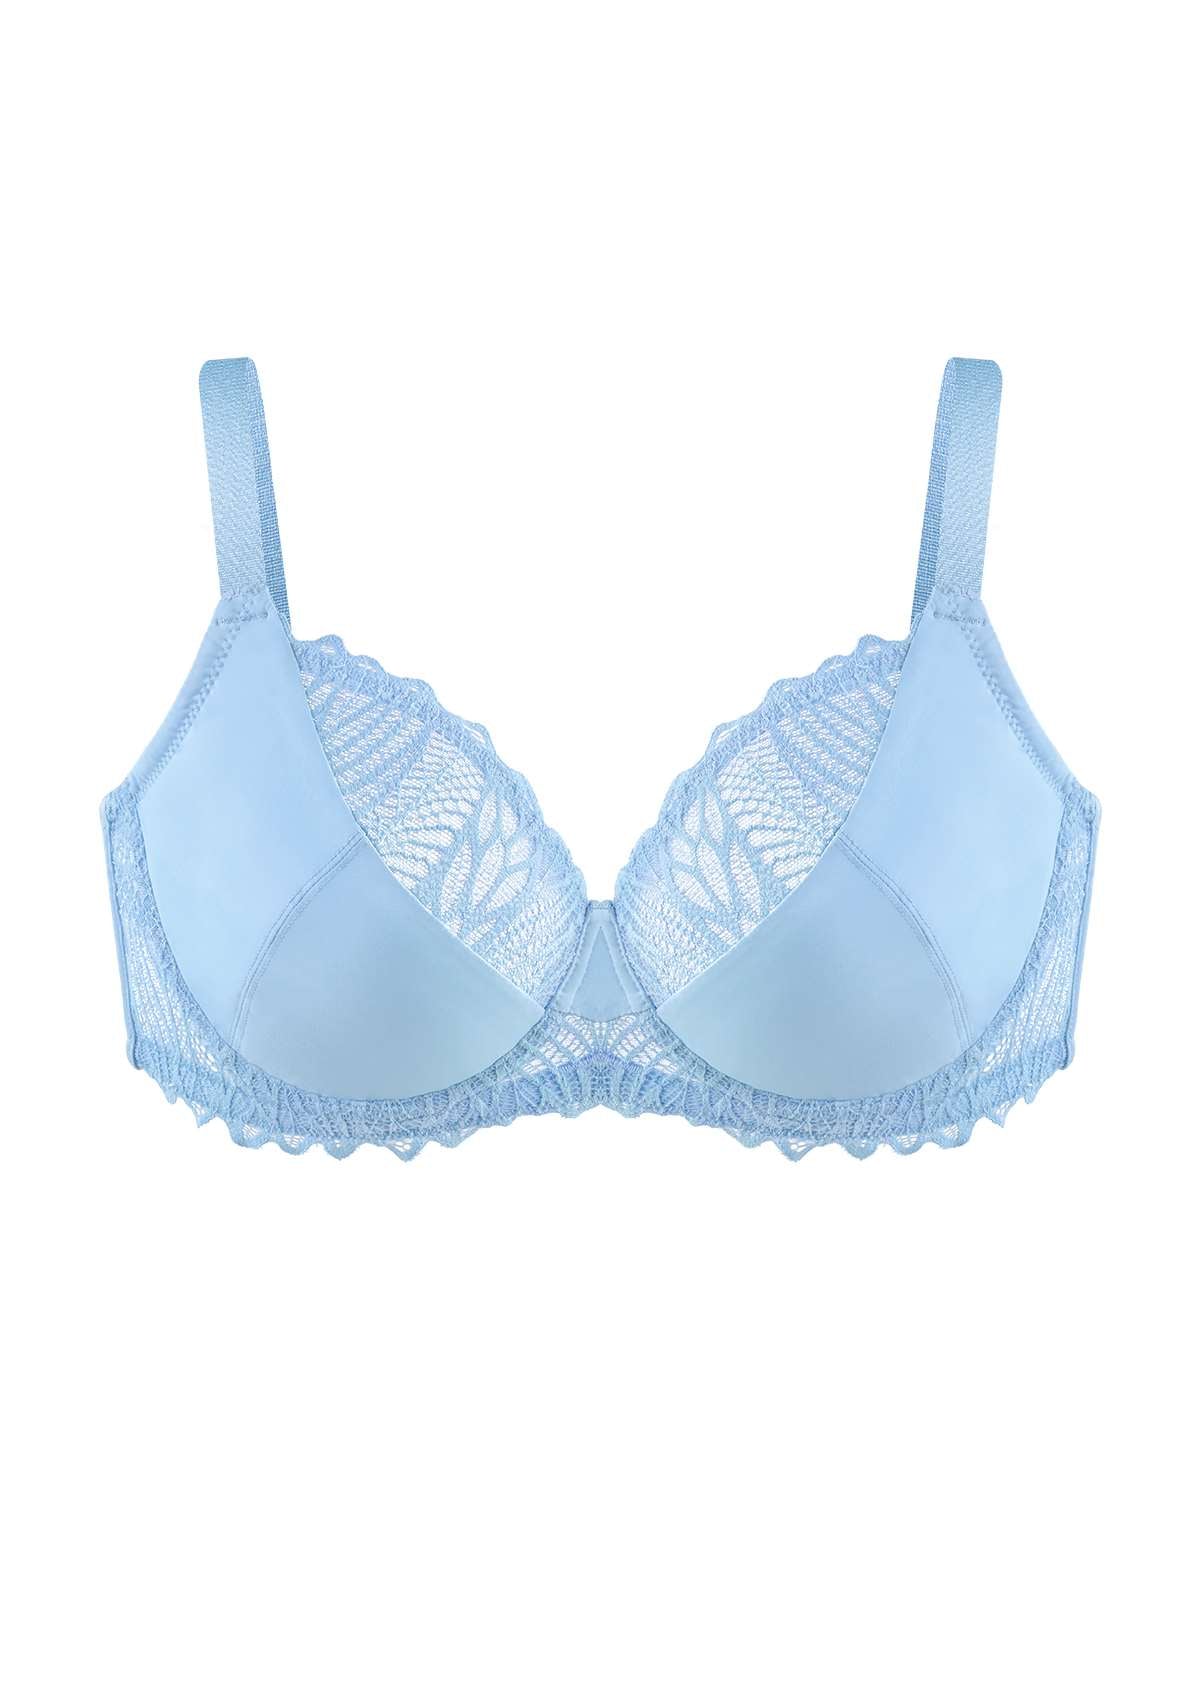 HSIA Pretty Secrets Lace-Trimmed Full Coverage Underwire Bra For Support - Light Blue / 40 / D